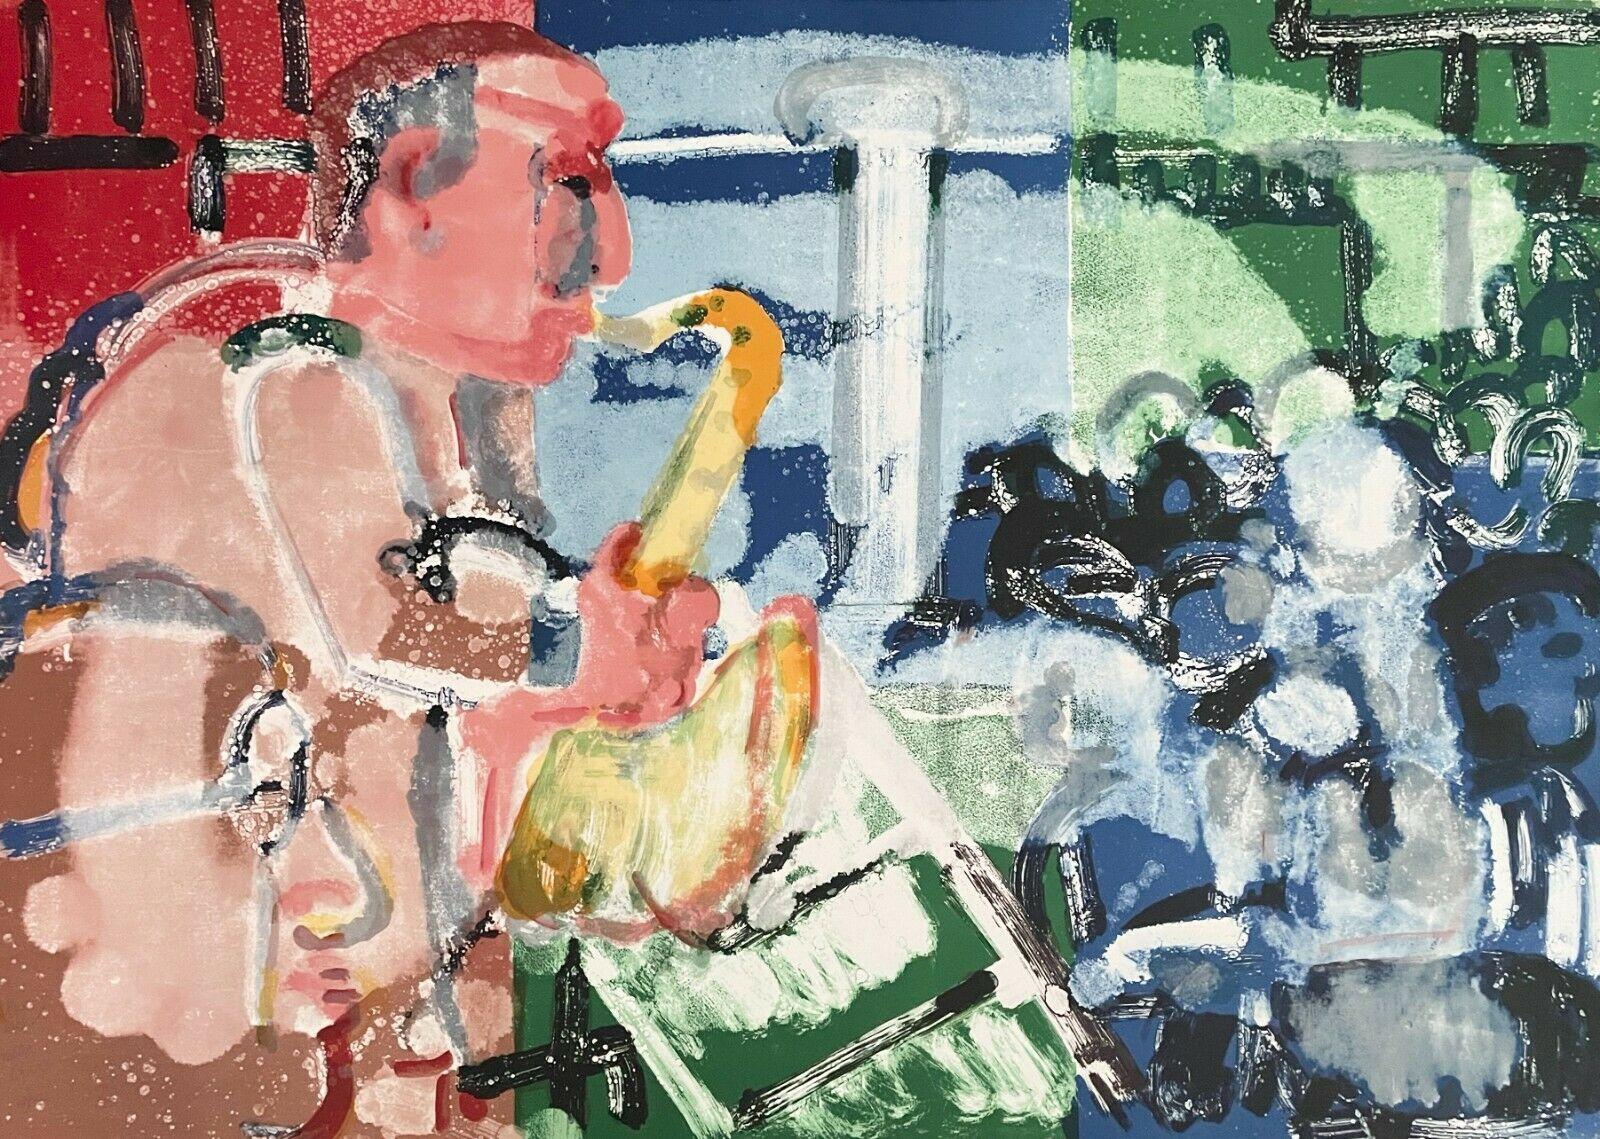 Artist: Romare Bearden (1911-1988)
Title: Bopping at the Birdland (Gelburd/Rosenberg 74)
Year: 1979
Medium: Lithograph on Arches paper
Edition: 131/175, plus proofs
Size: 24 x 33.25 inches
Condition: Excellent
Inscription: Signed and numbered by the